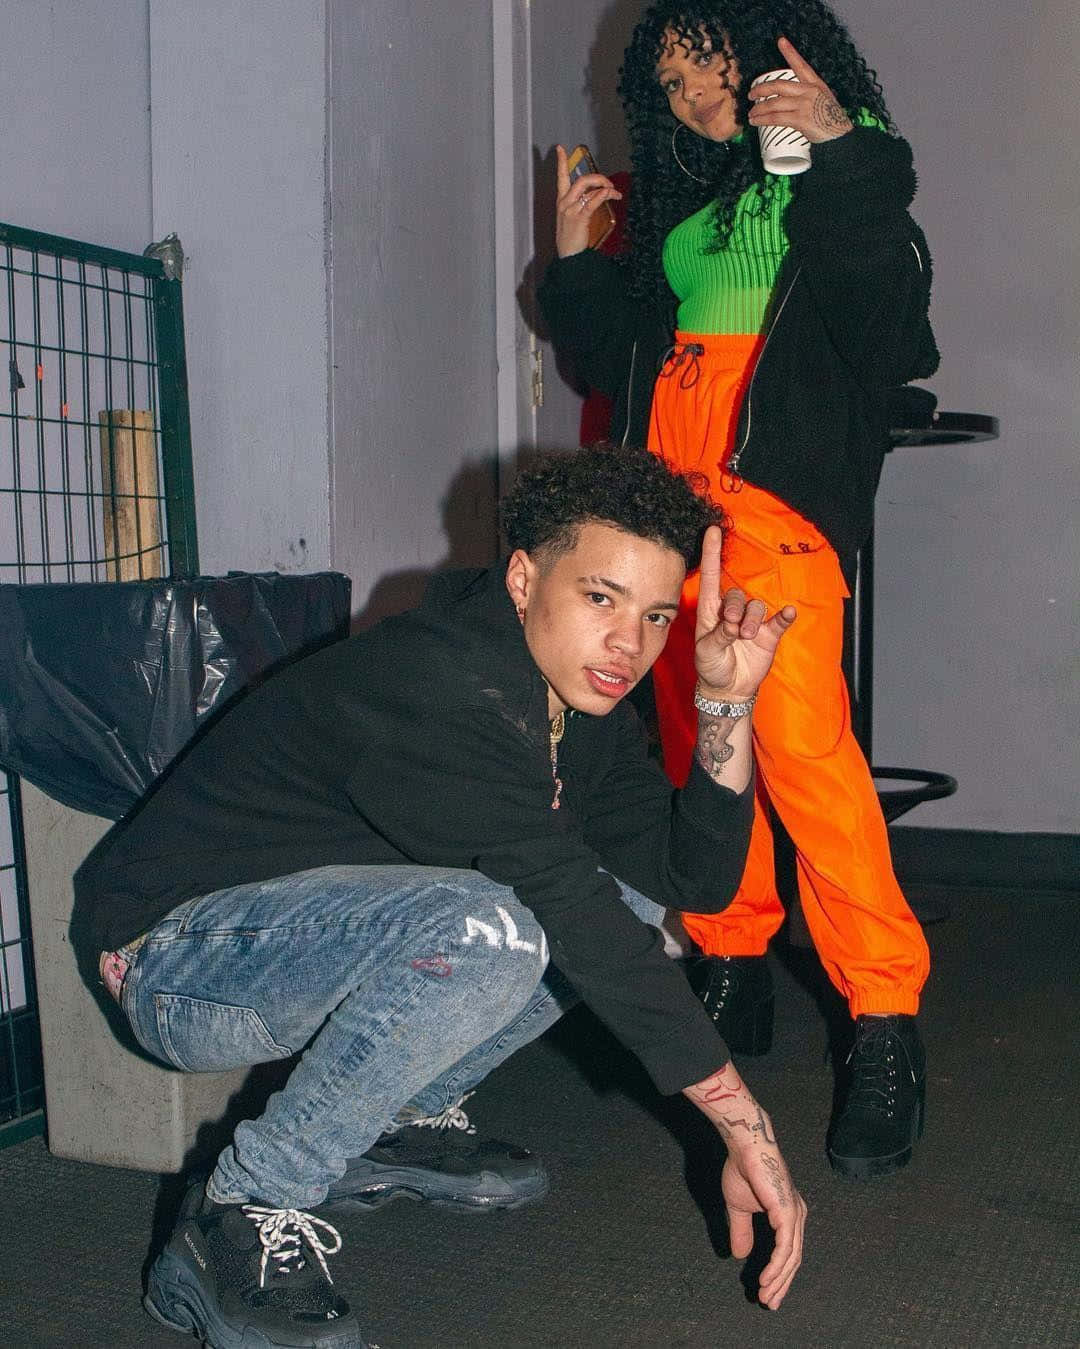 "Lil Mosey - the Young Rapper on the Rise" Wallpaper